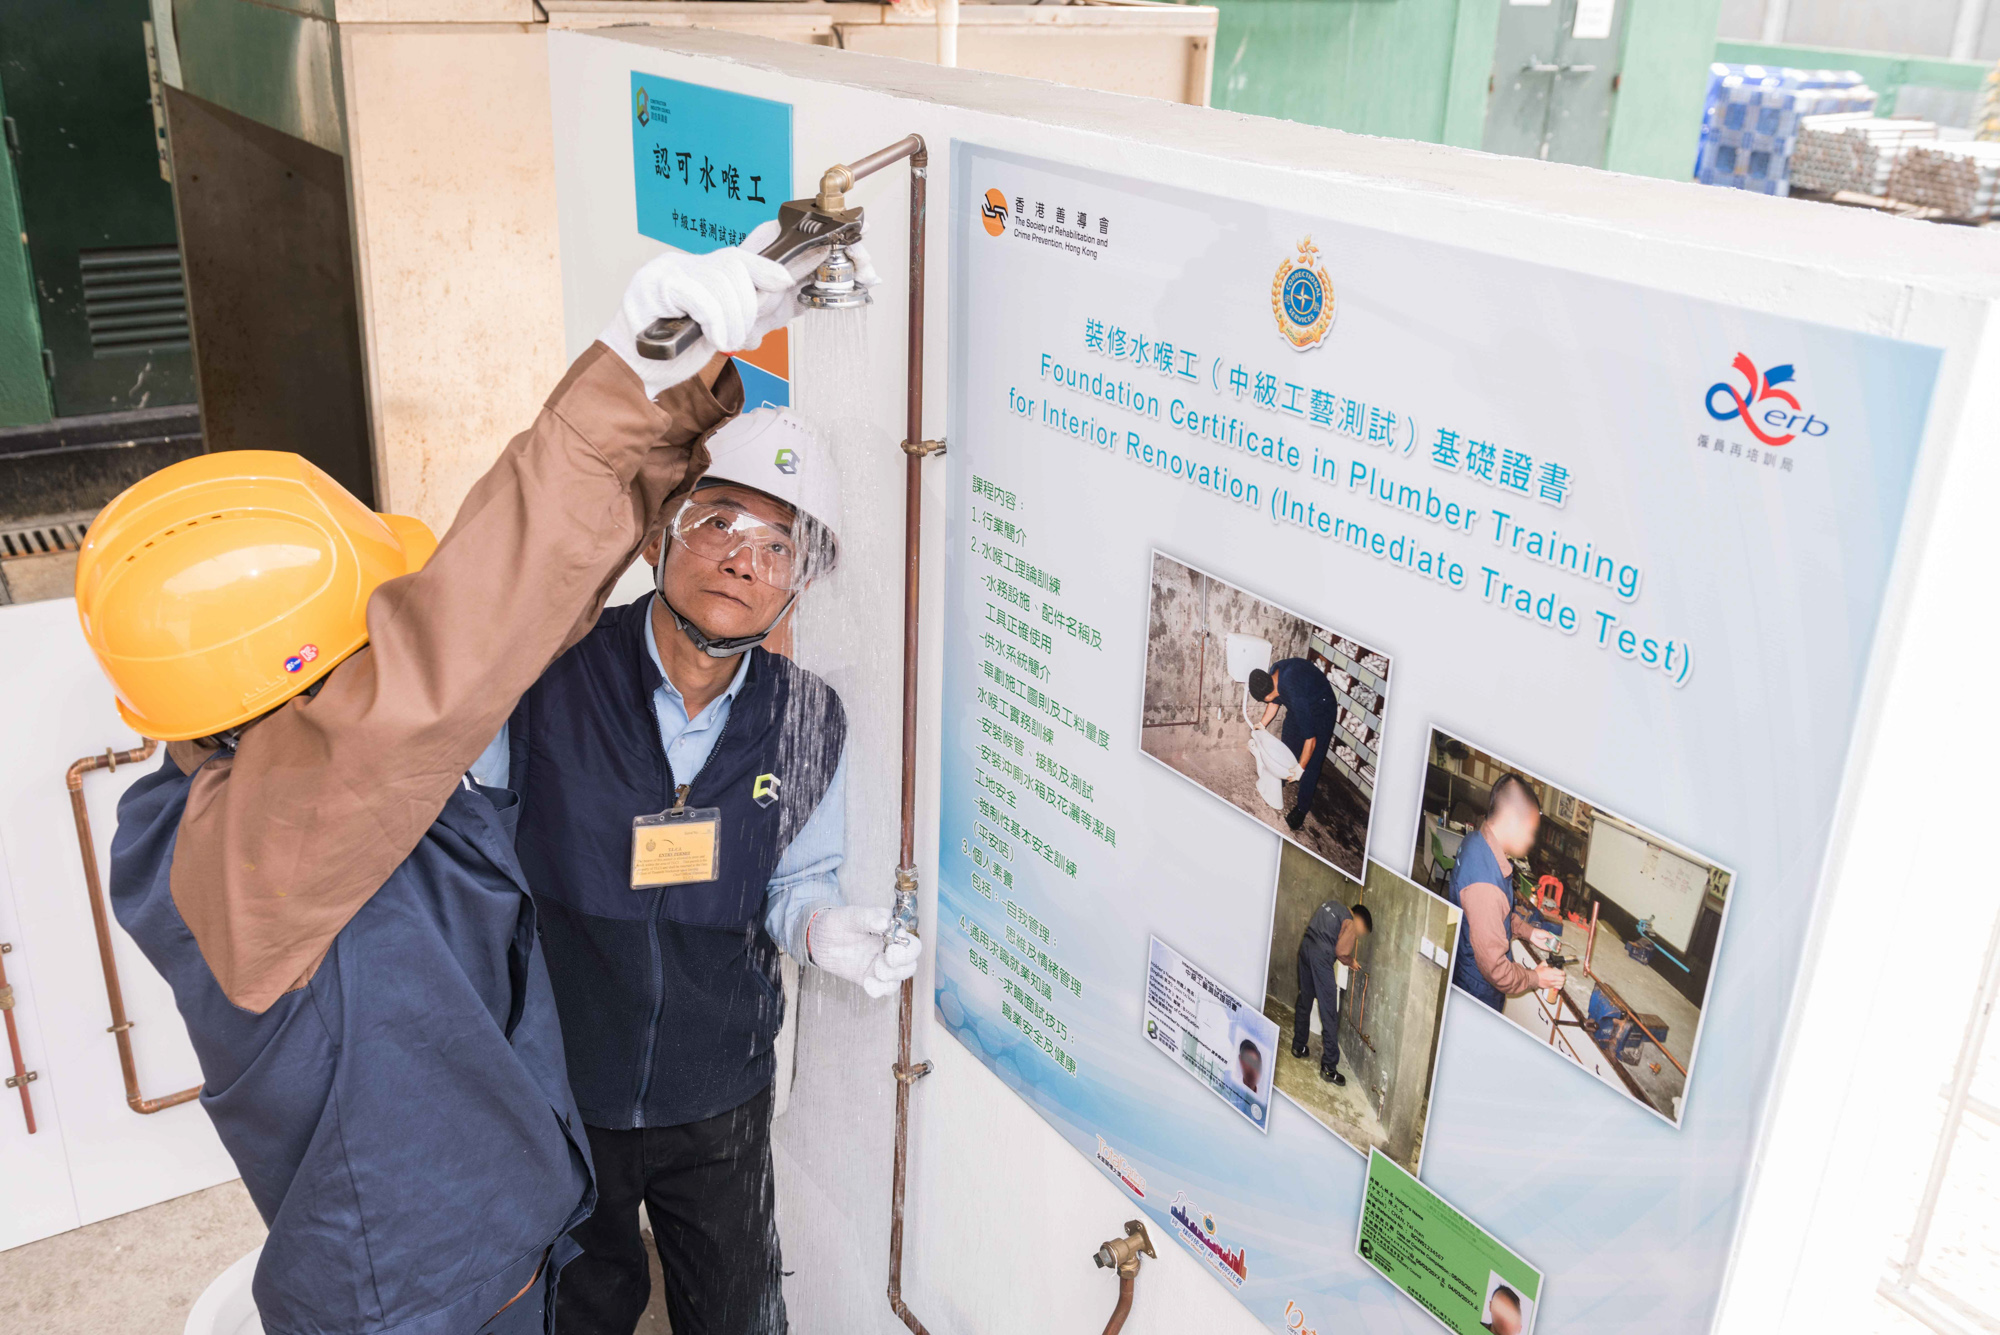 The Department introduced a new Foundation Certificate in
Plumber Training for Interior Renovation (Intermediate Trade Test) to strengthen the provision of construction-related vocational training for persons in custody.